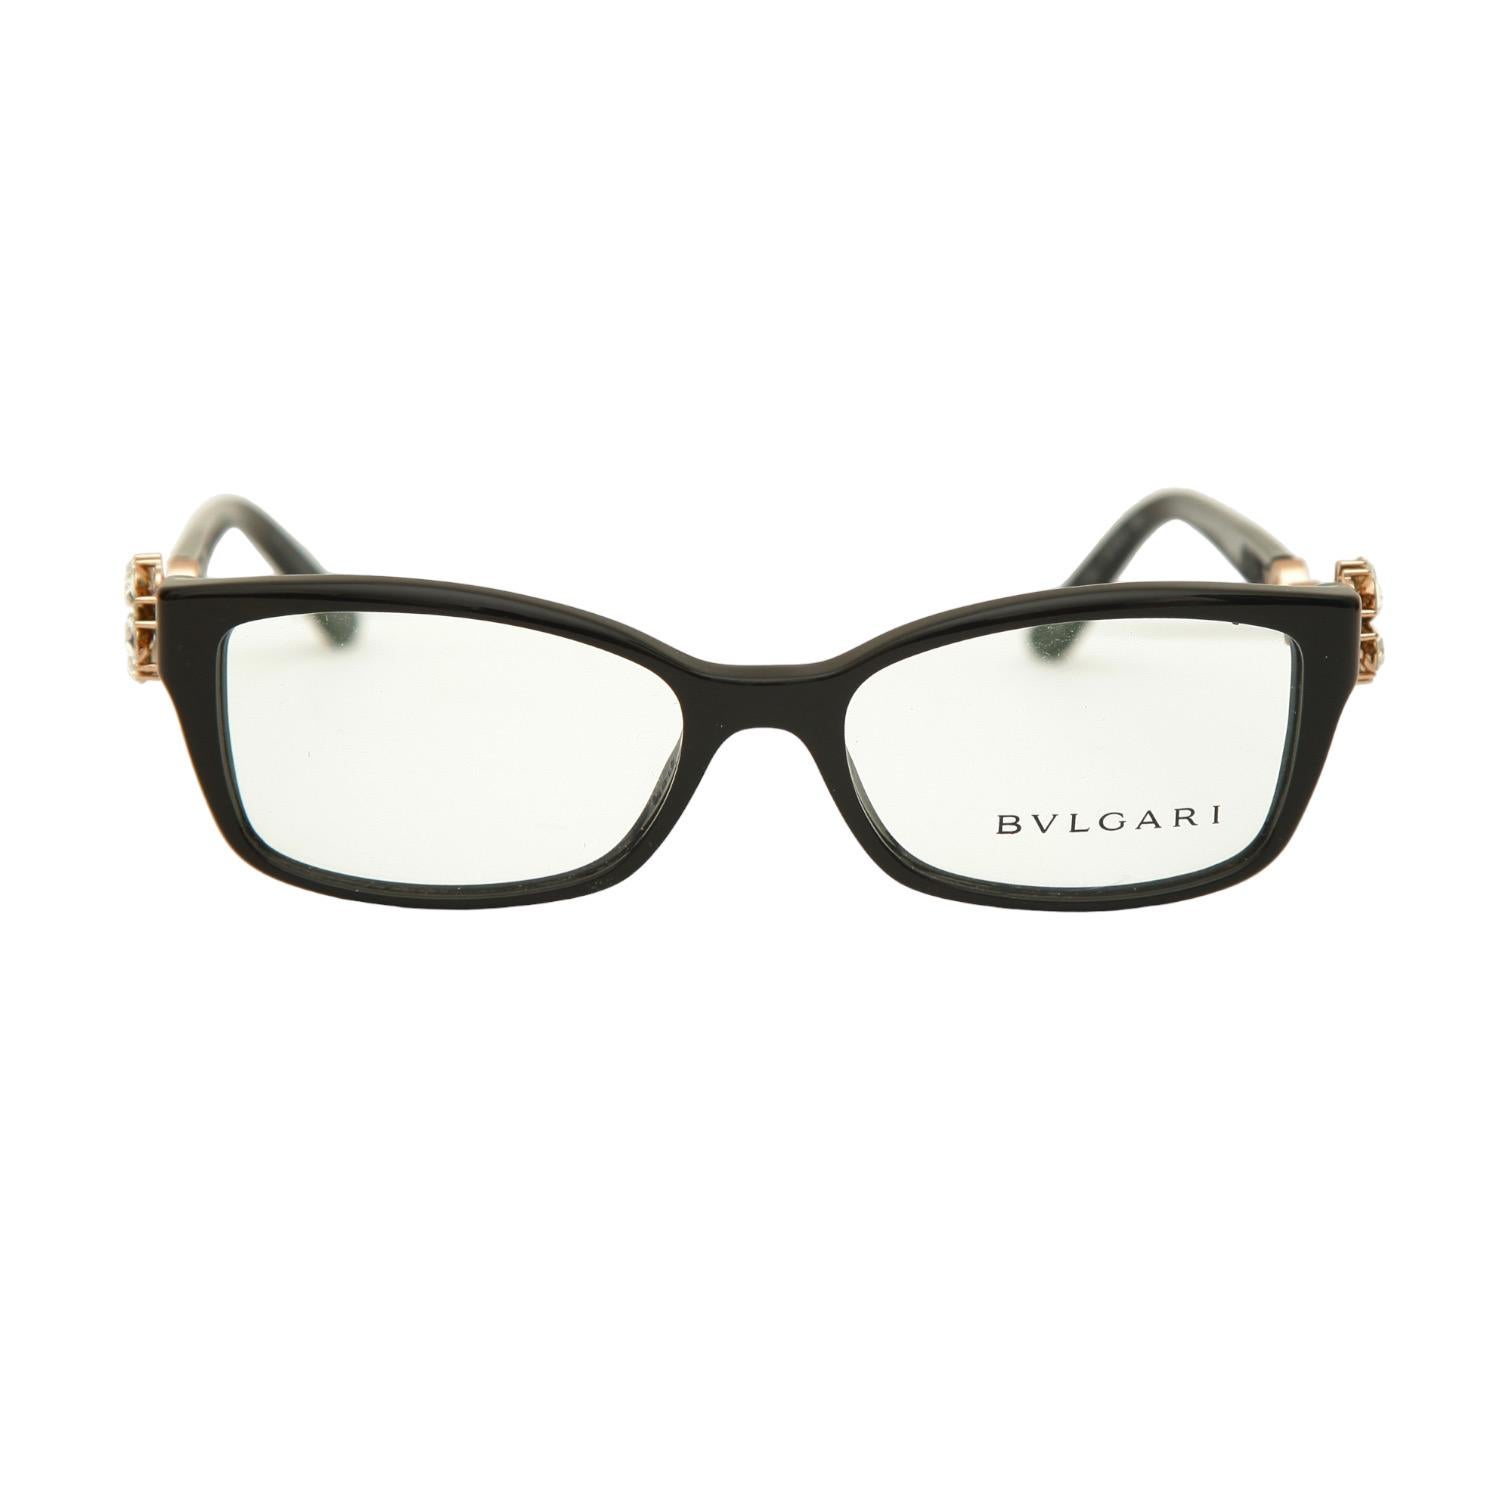 GUARANTEED AUTHENTIC BVLGARI LIMITED EDITION BLACK CRYSTAL EYEGLASS FRAMES

LIMITED EDITION

Eye 51mm, Bridge 16mm, Temple 135mm

Details: 
- Full black rim frames.
- Used for prescription or even sunglasses.
-  Black arms, crystal detail.
- Comes